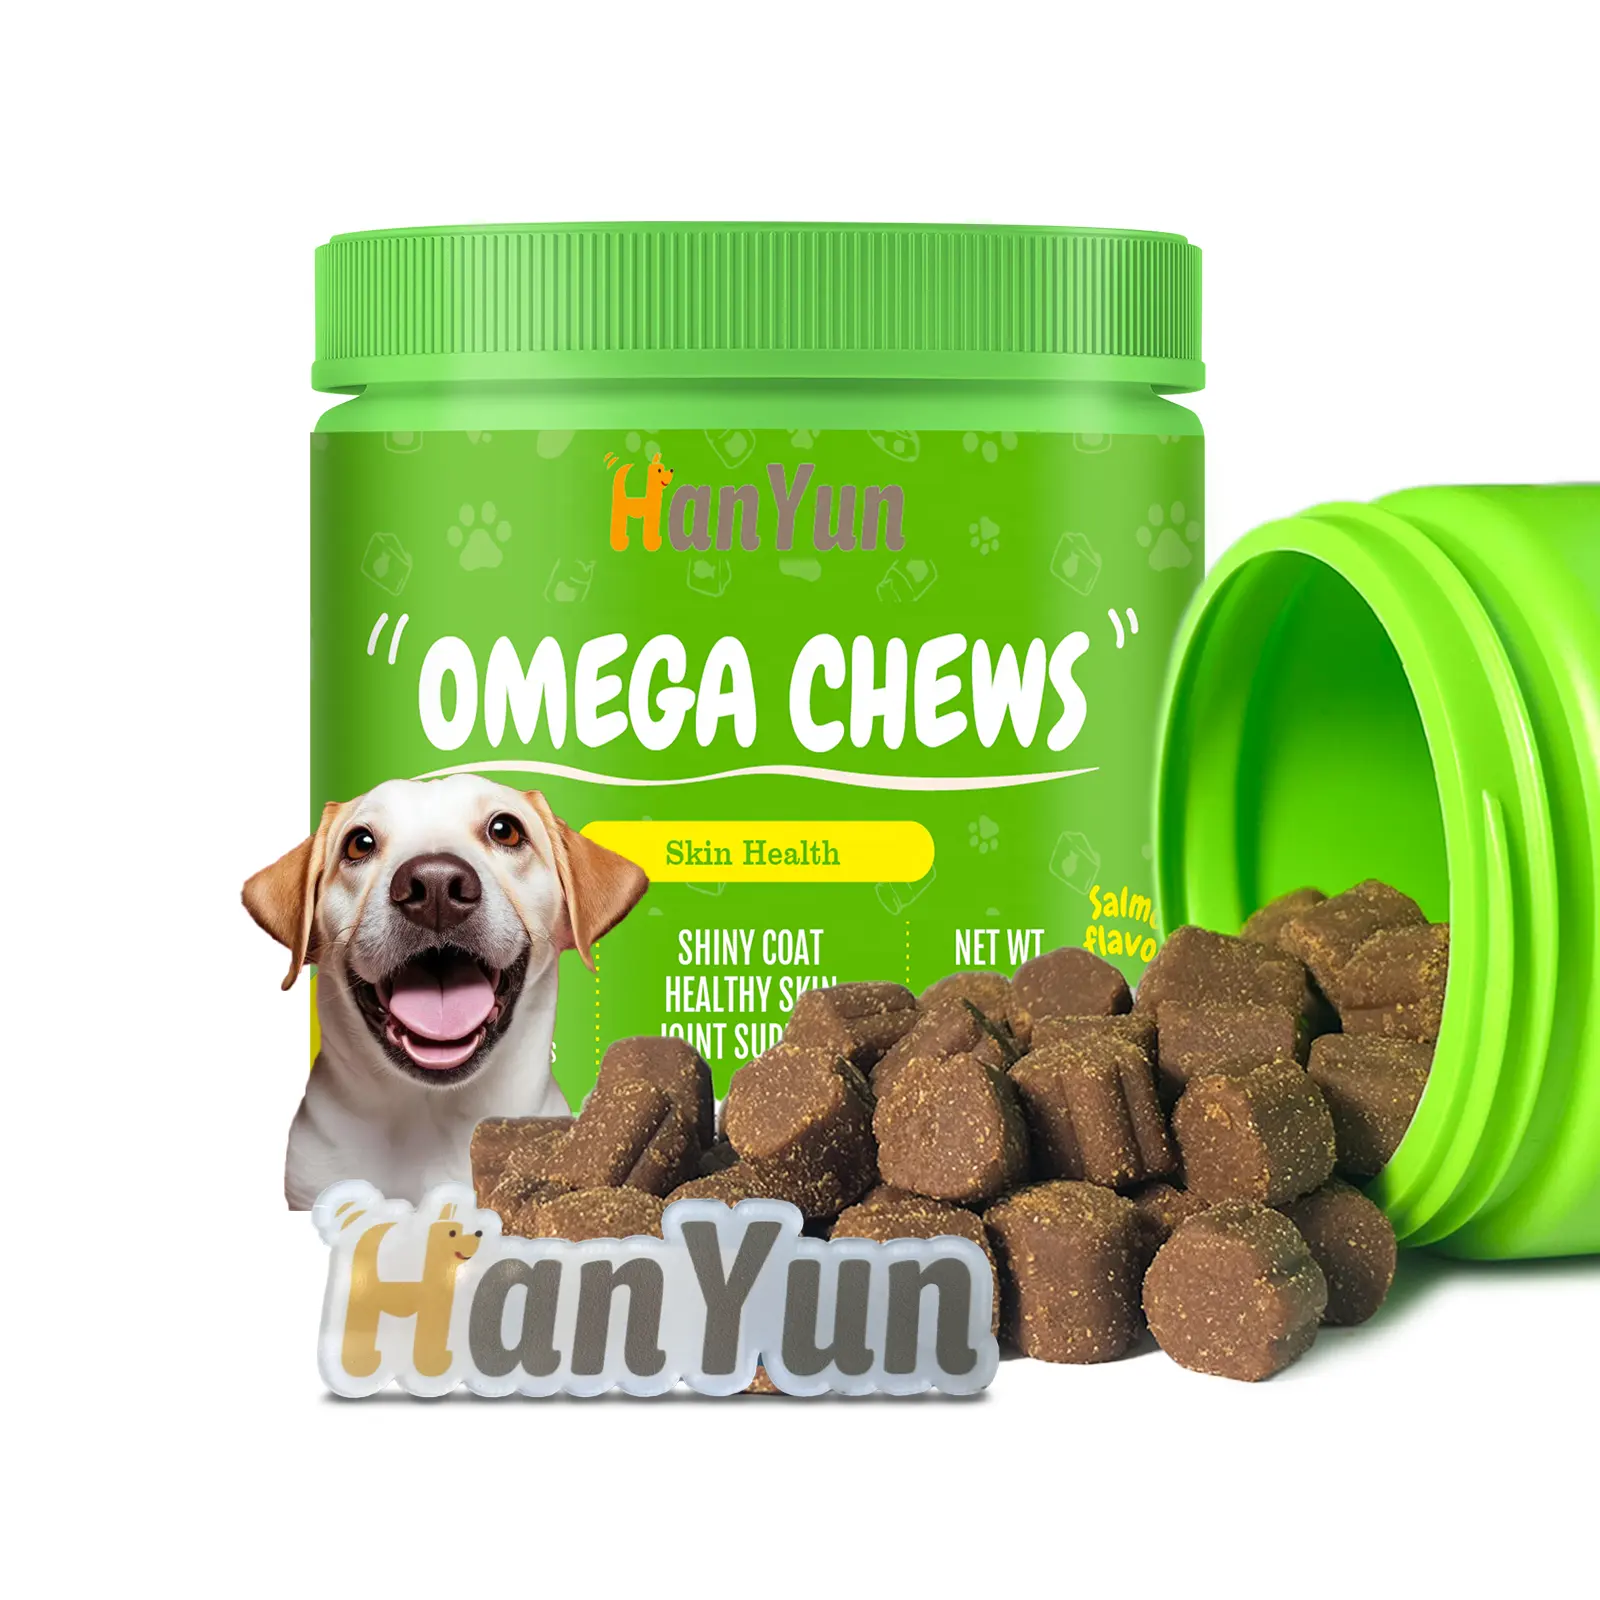 Omega 3 Fish Oil Omega Chew Treats For Dogs Skin And Coat -And Joints Health+ Immune System-Pet care of 120 chews per bottle